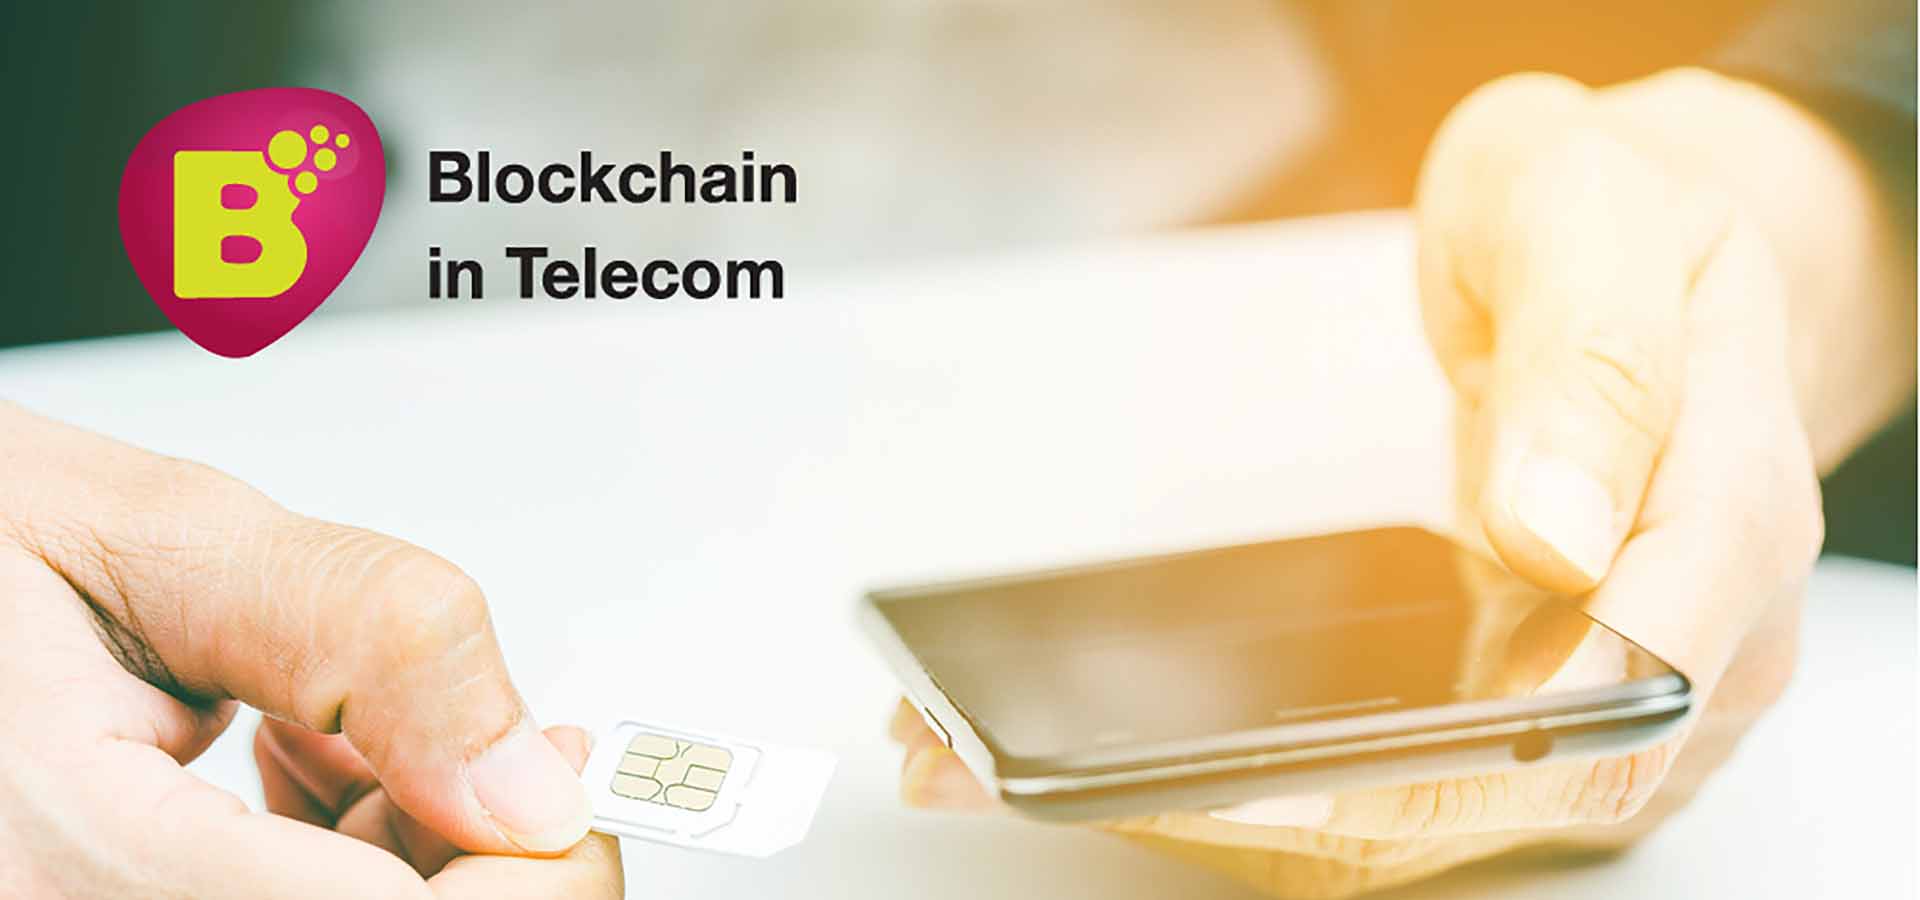 Bubbletone Collects $8.6 Million via ICO and Successfully Tests Proprietary Roaming-Free SIM Card